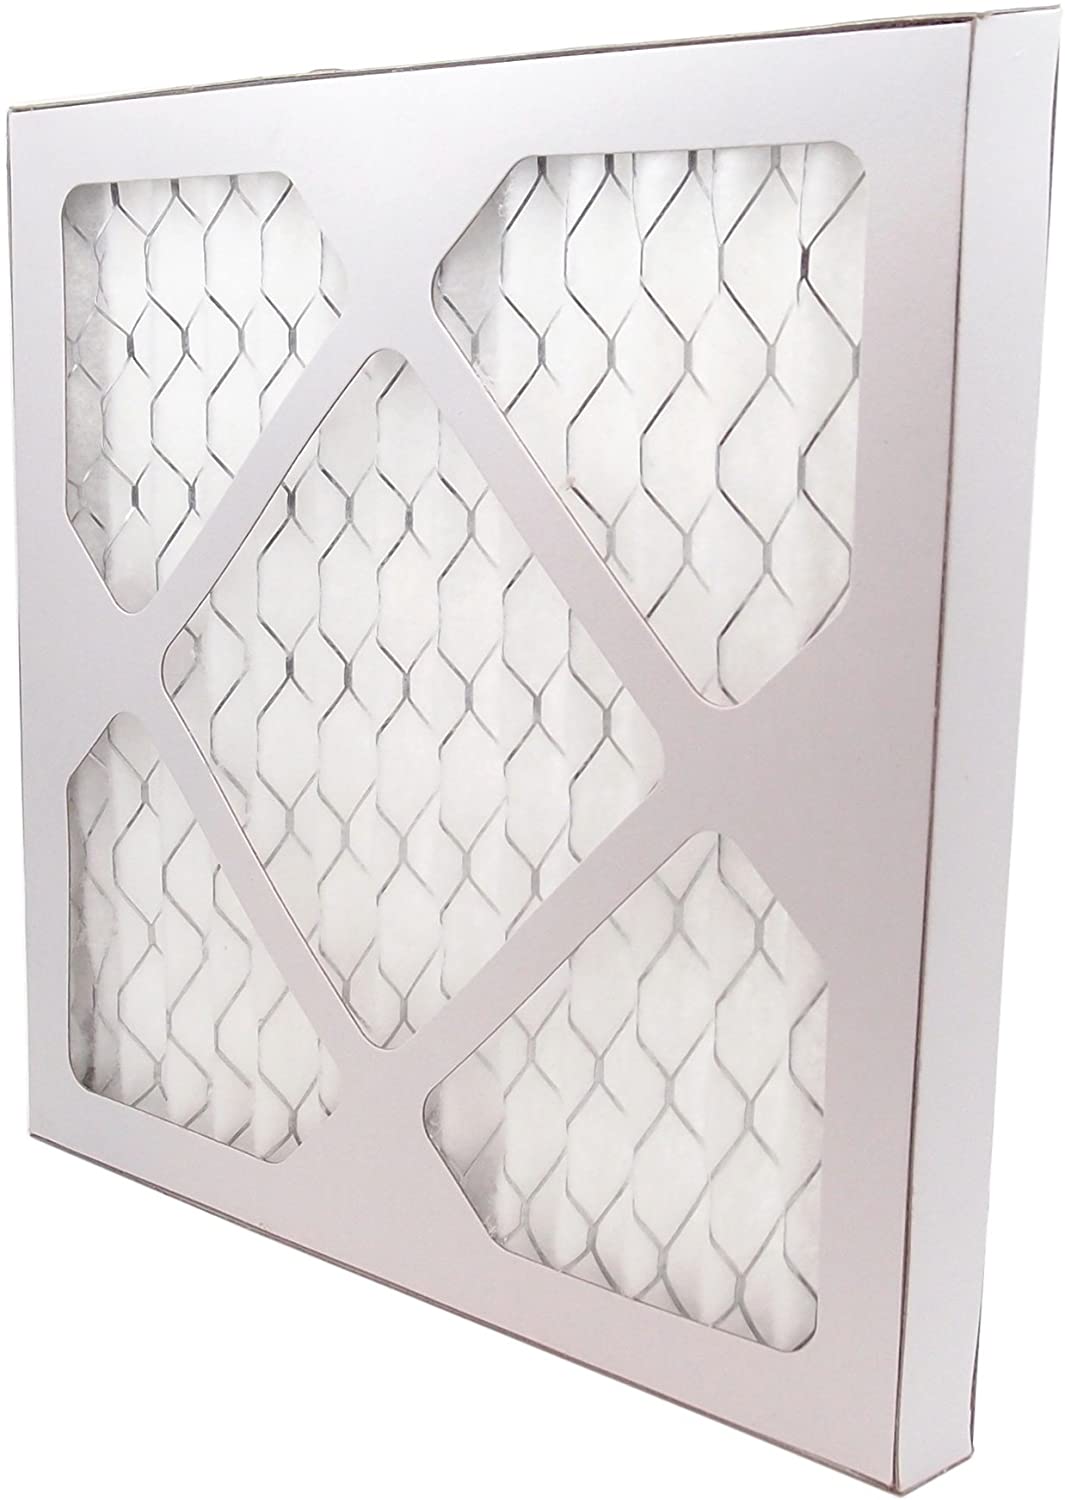 30&quot; x 10&quot; Pleated MERV 8 Filter for HVAC Return Filter Grille [Actual Dimensions: 29.75 X 9.75] 3-Pack